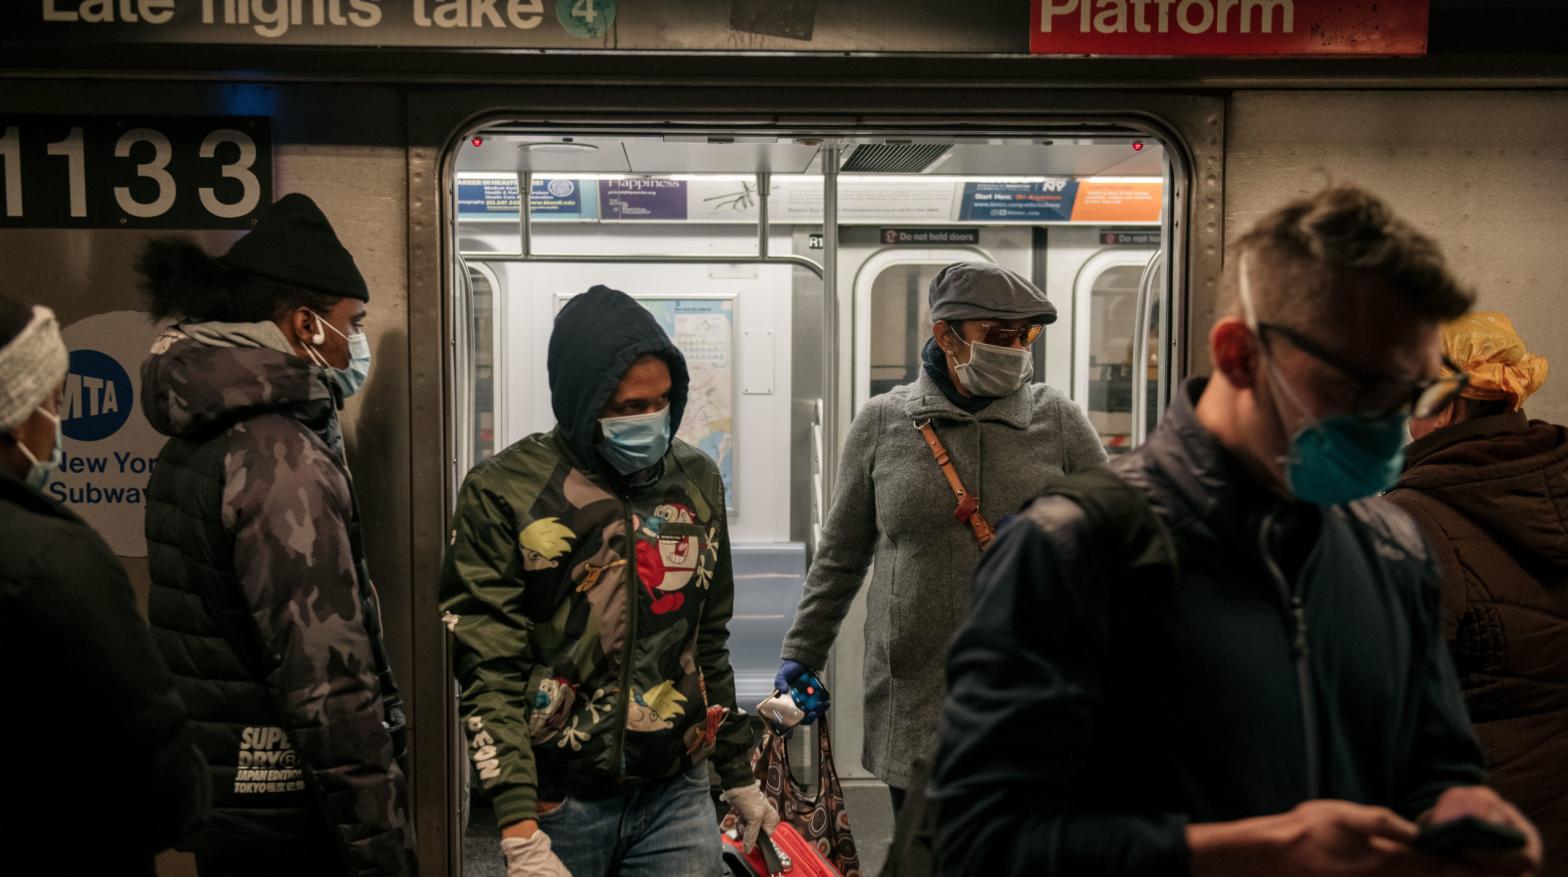 NYC commuters in April 2020. (Photo: Scott Heins, Getty Images)